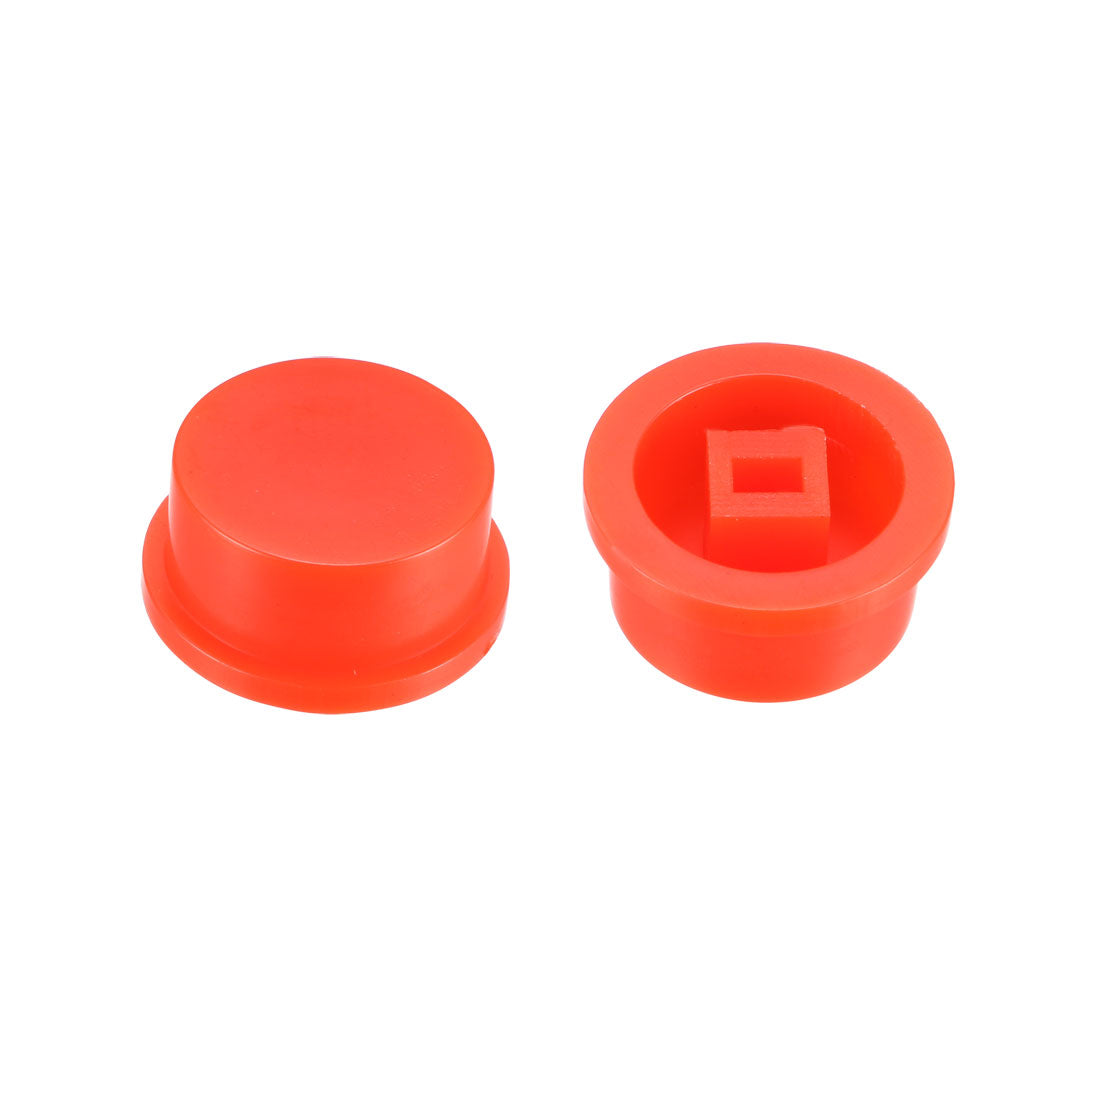 uxcell Uxcell 25Pcs Plastic 13.5x7.5mm Latching Pushbutton Tactile Switch Caps Cover Keycaps Protector Red